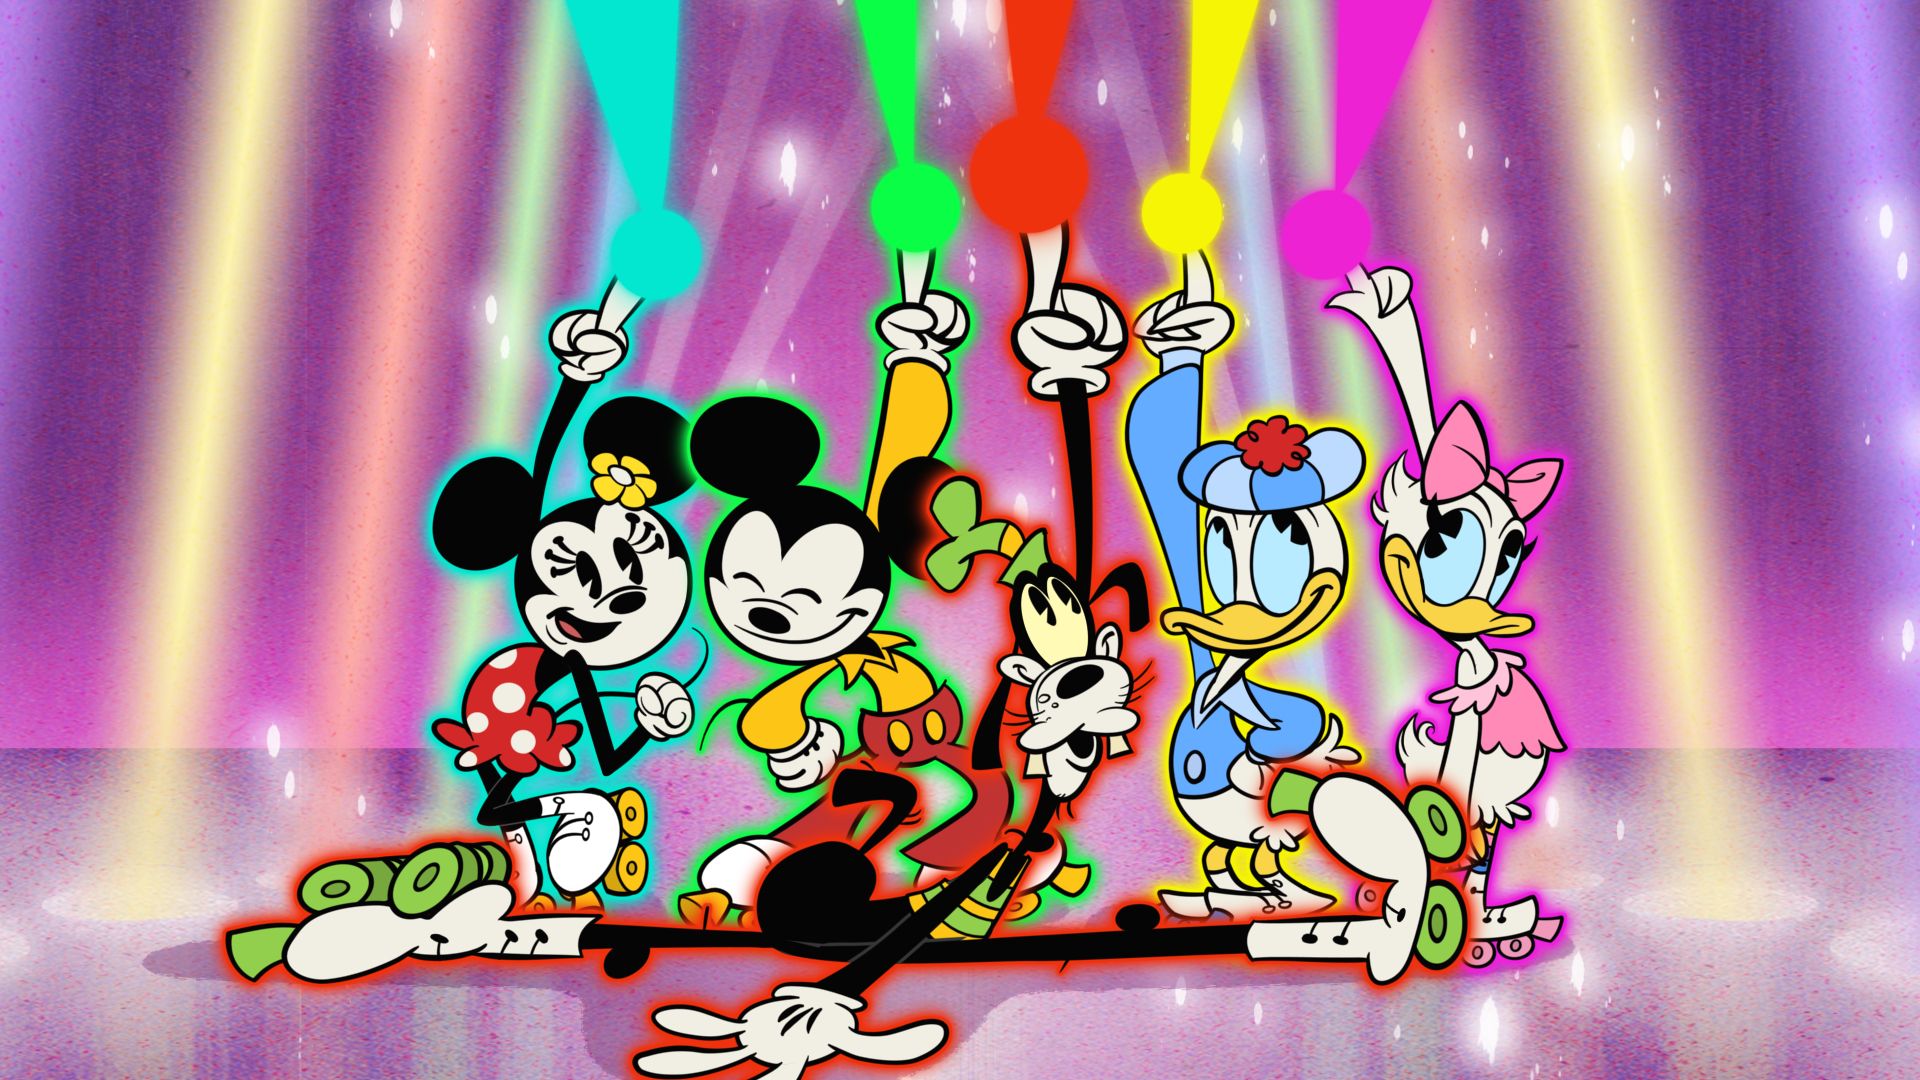 The Wonderful World of Mickey Mouse background